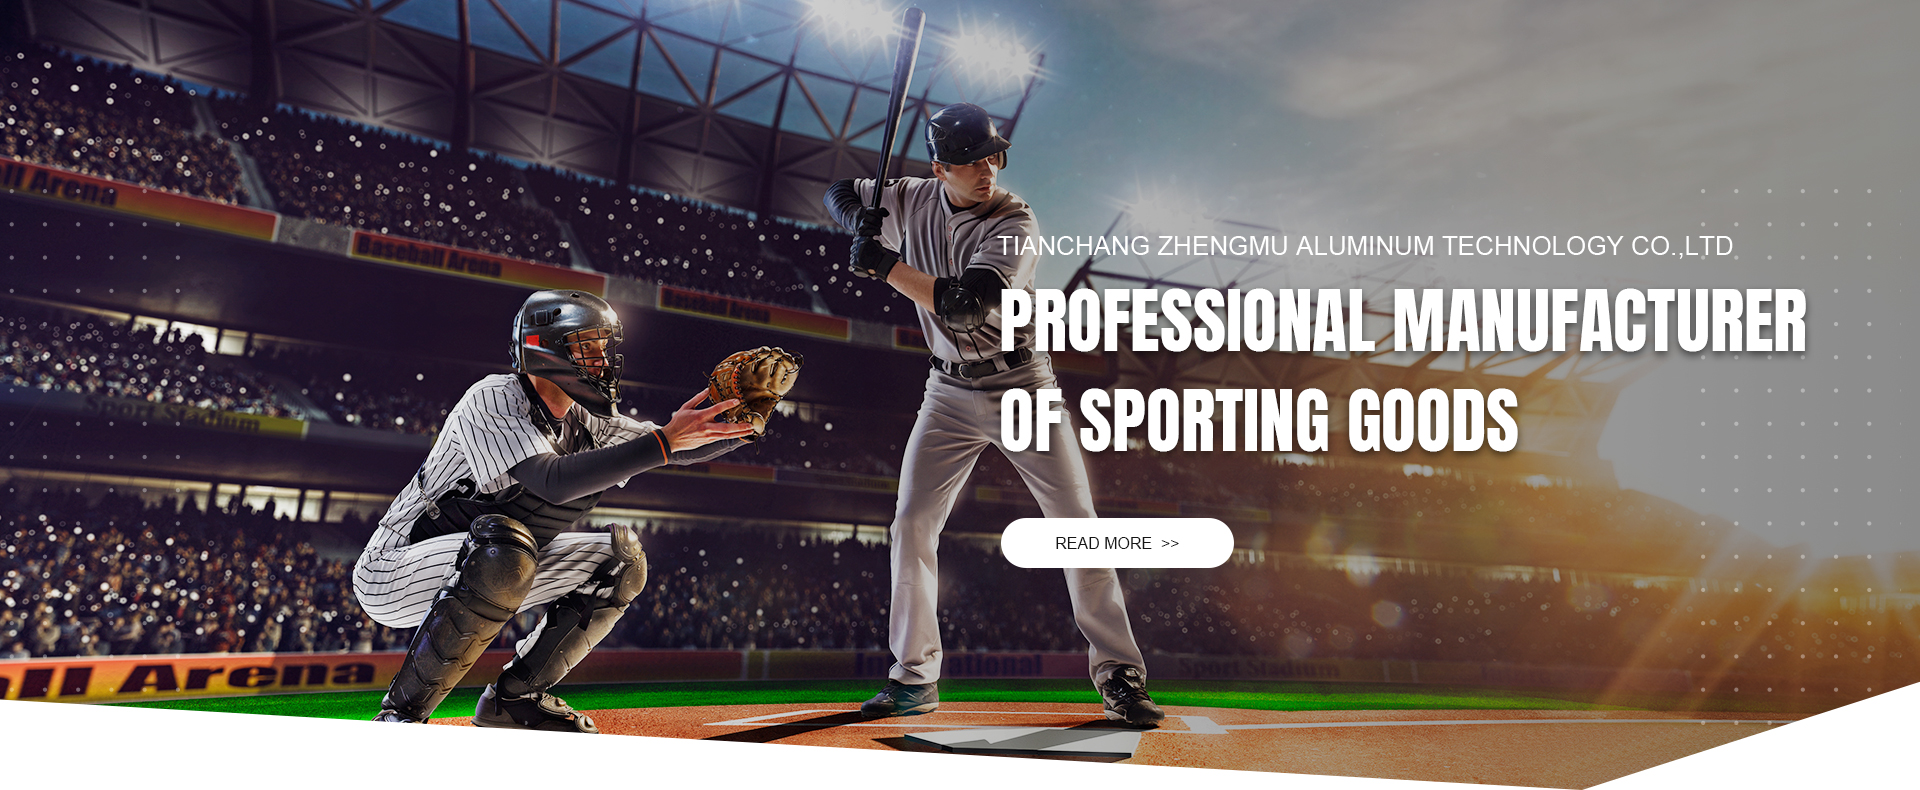 professional manufacturer of sporting goods